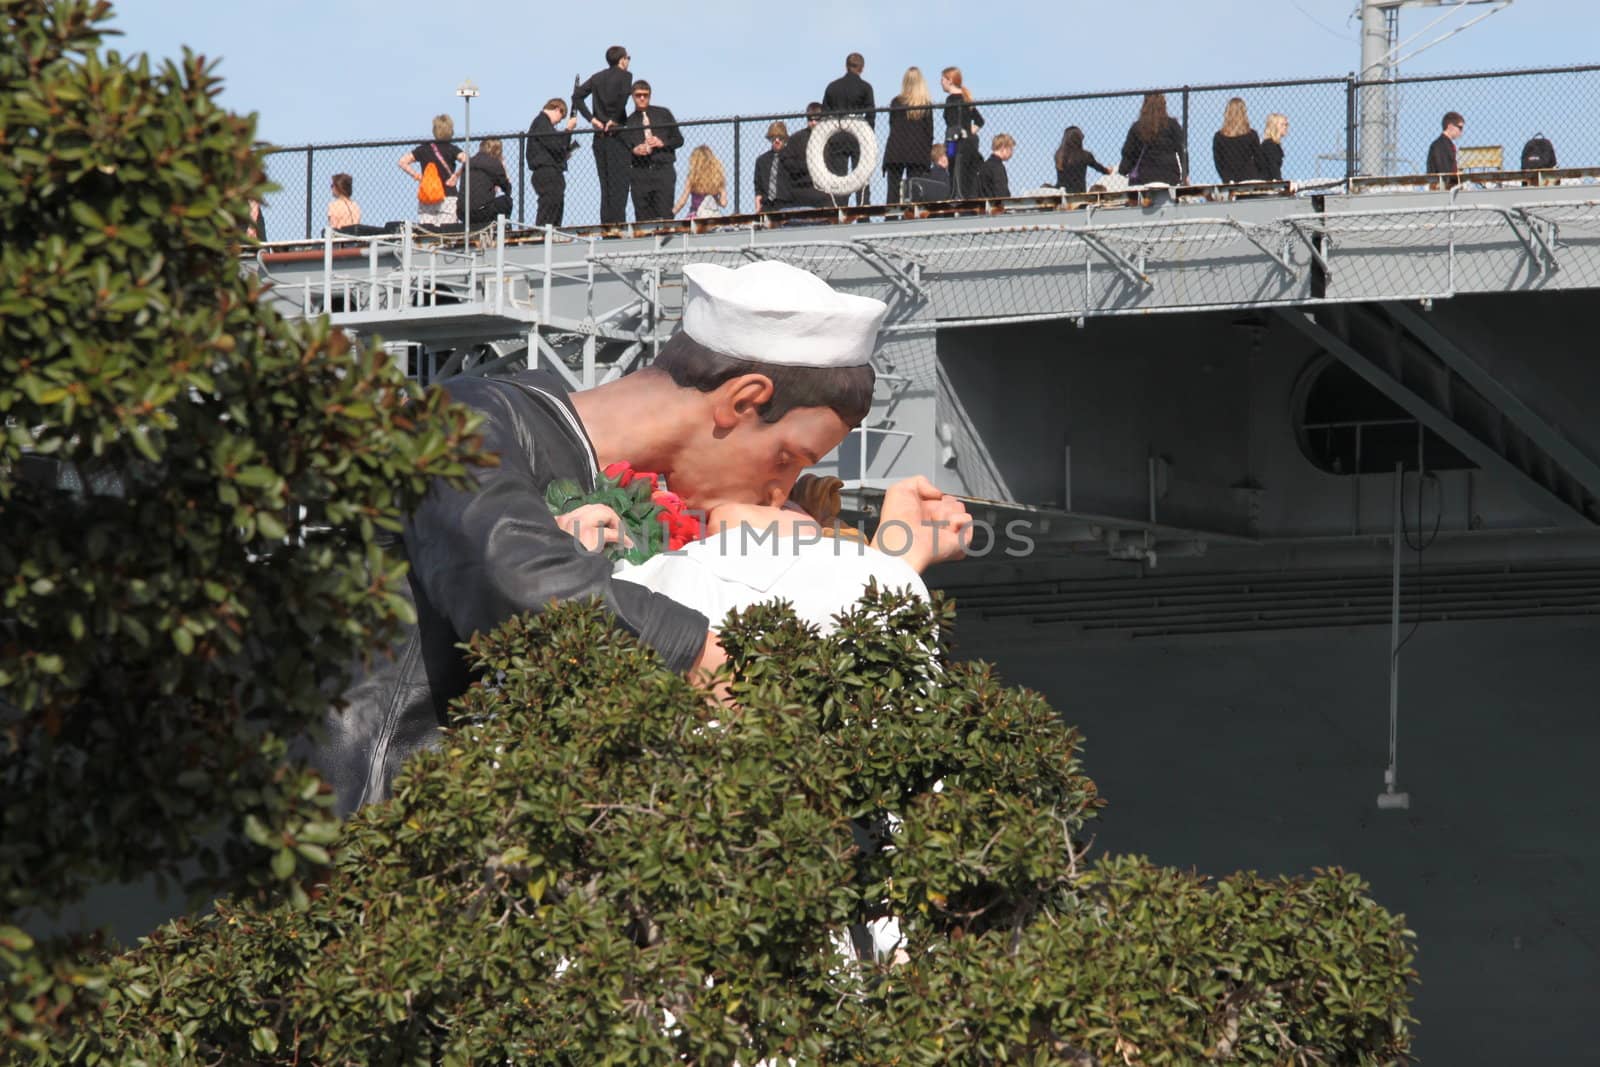 San Diego WWII Kiss Statue Ceremony by hlehnerer